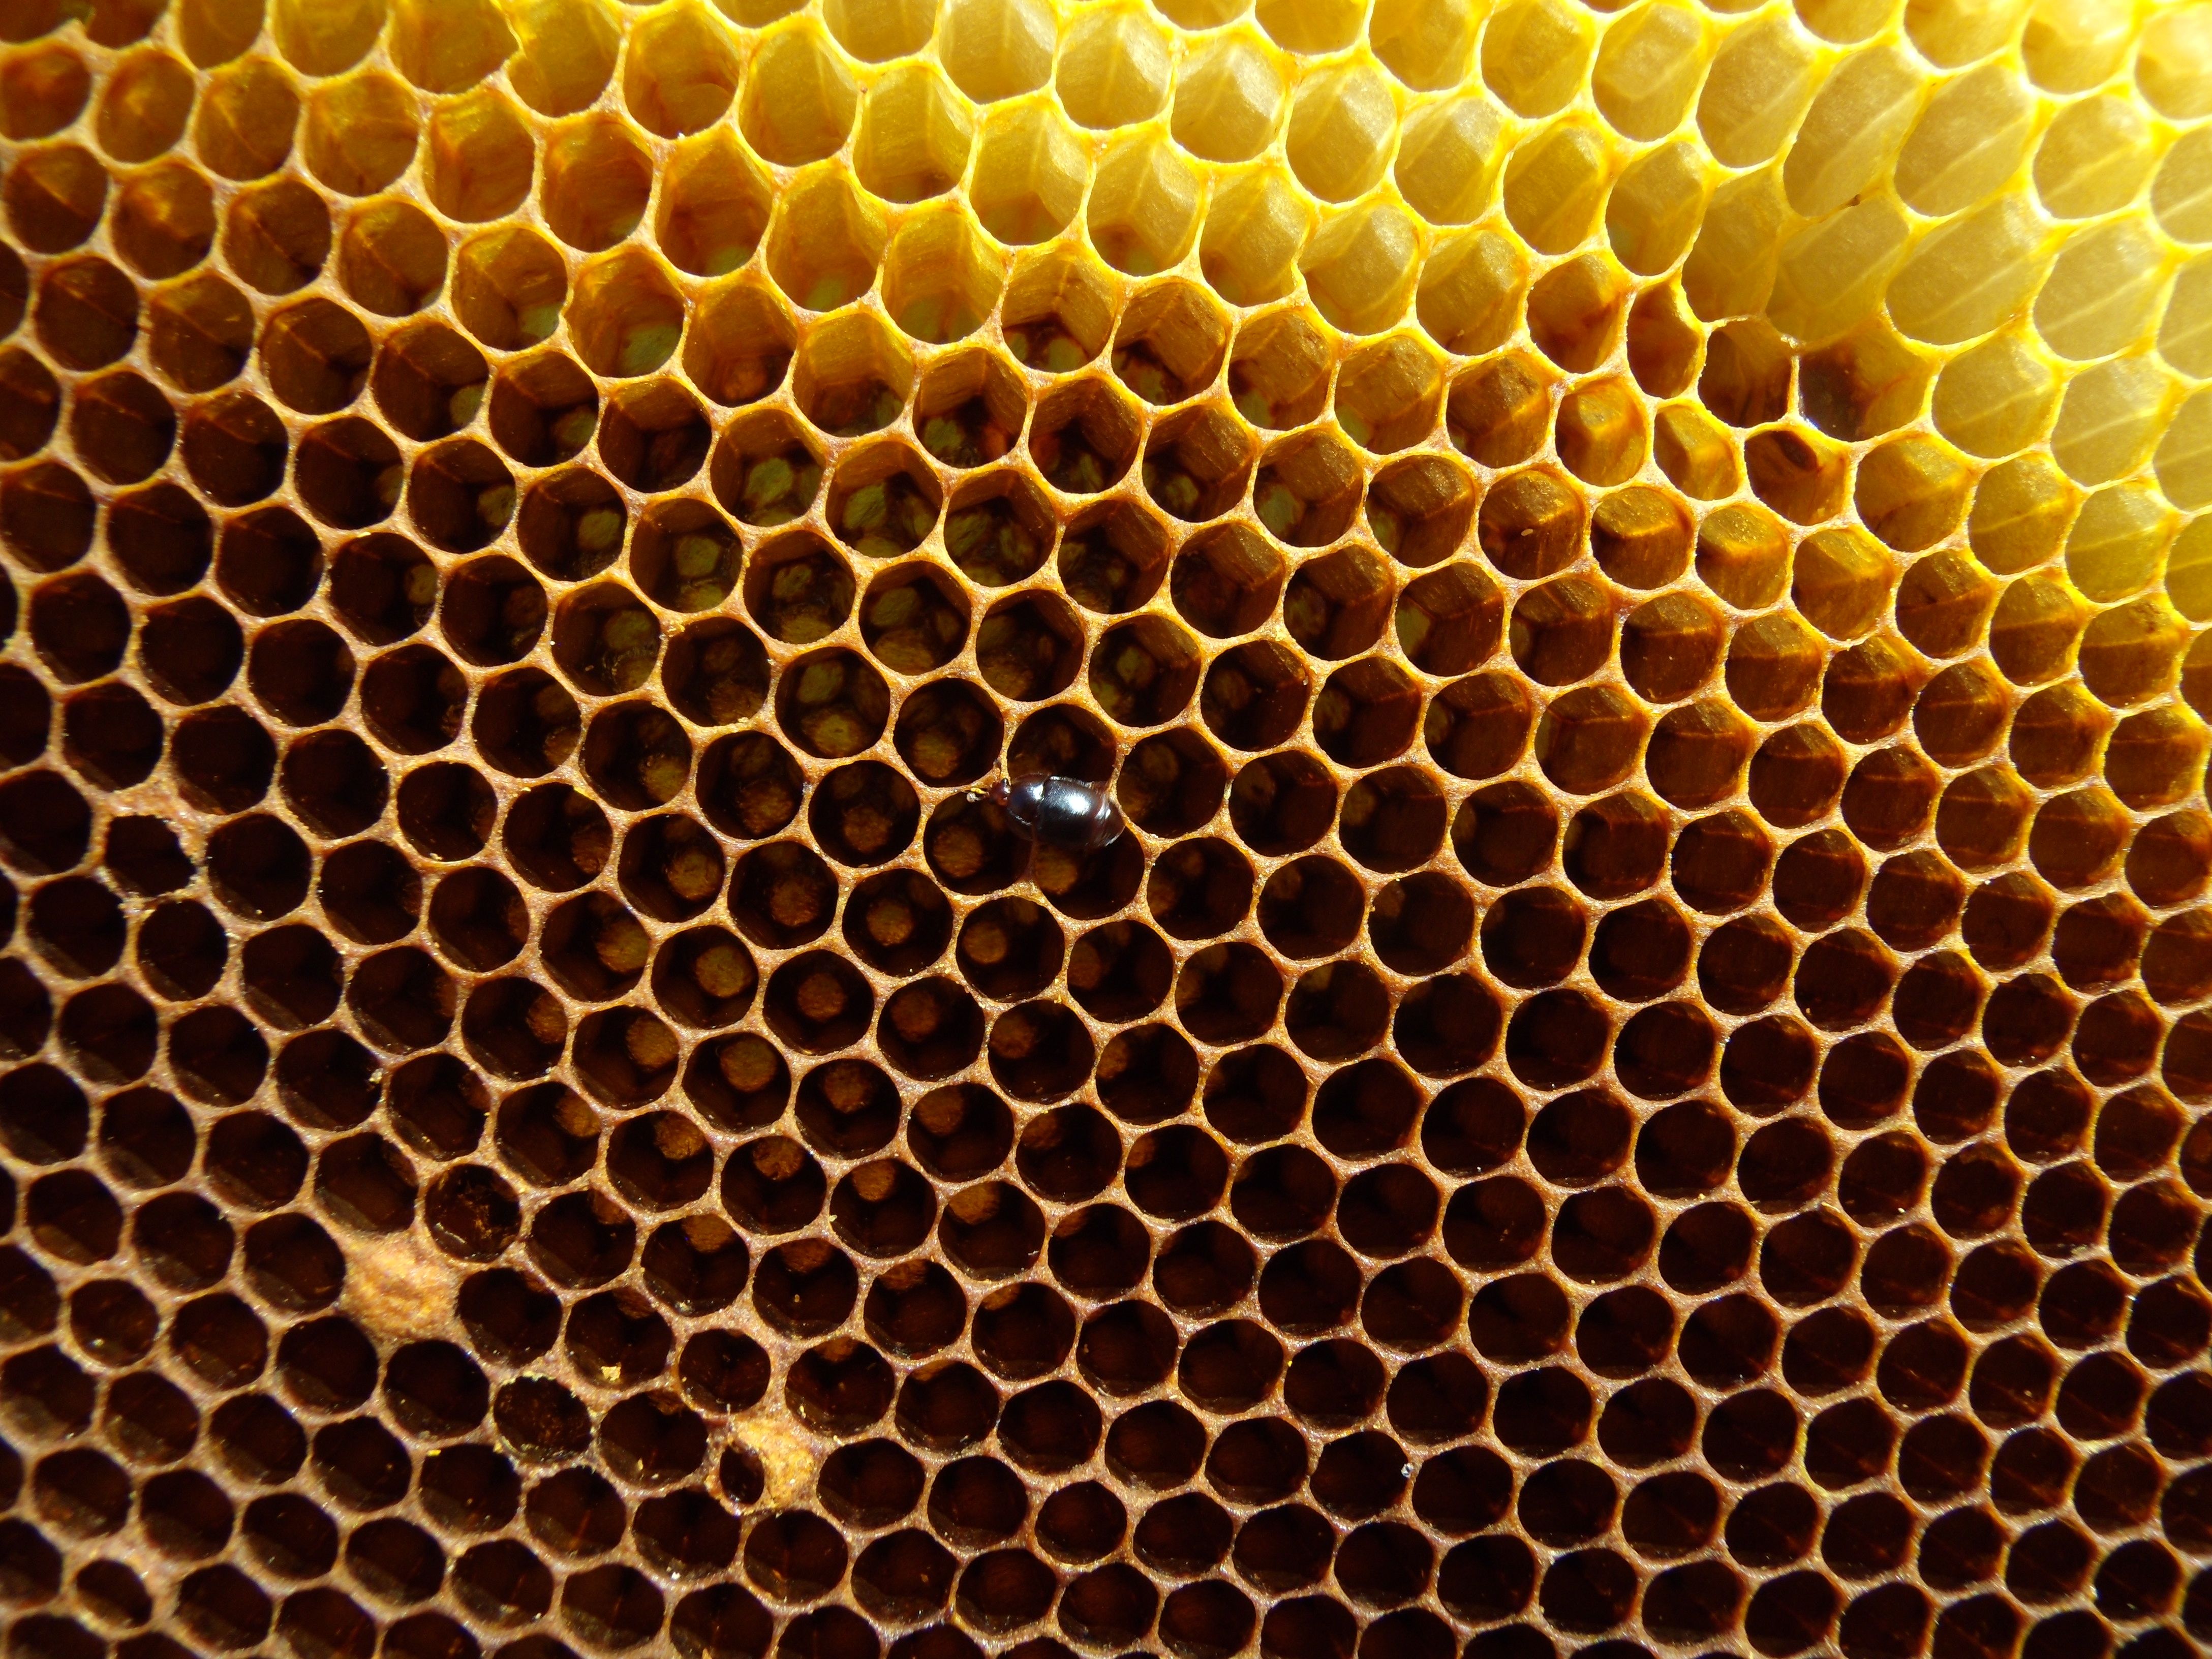 Amazing Hive Pictures & Backgrounds